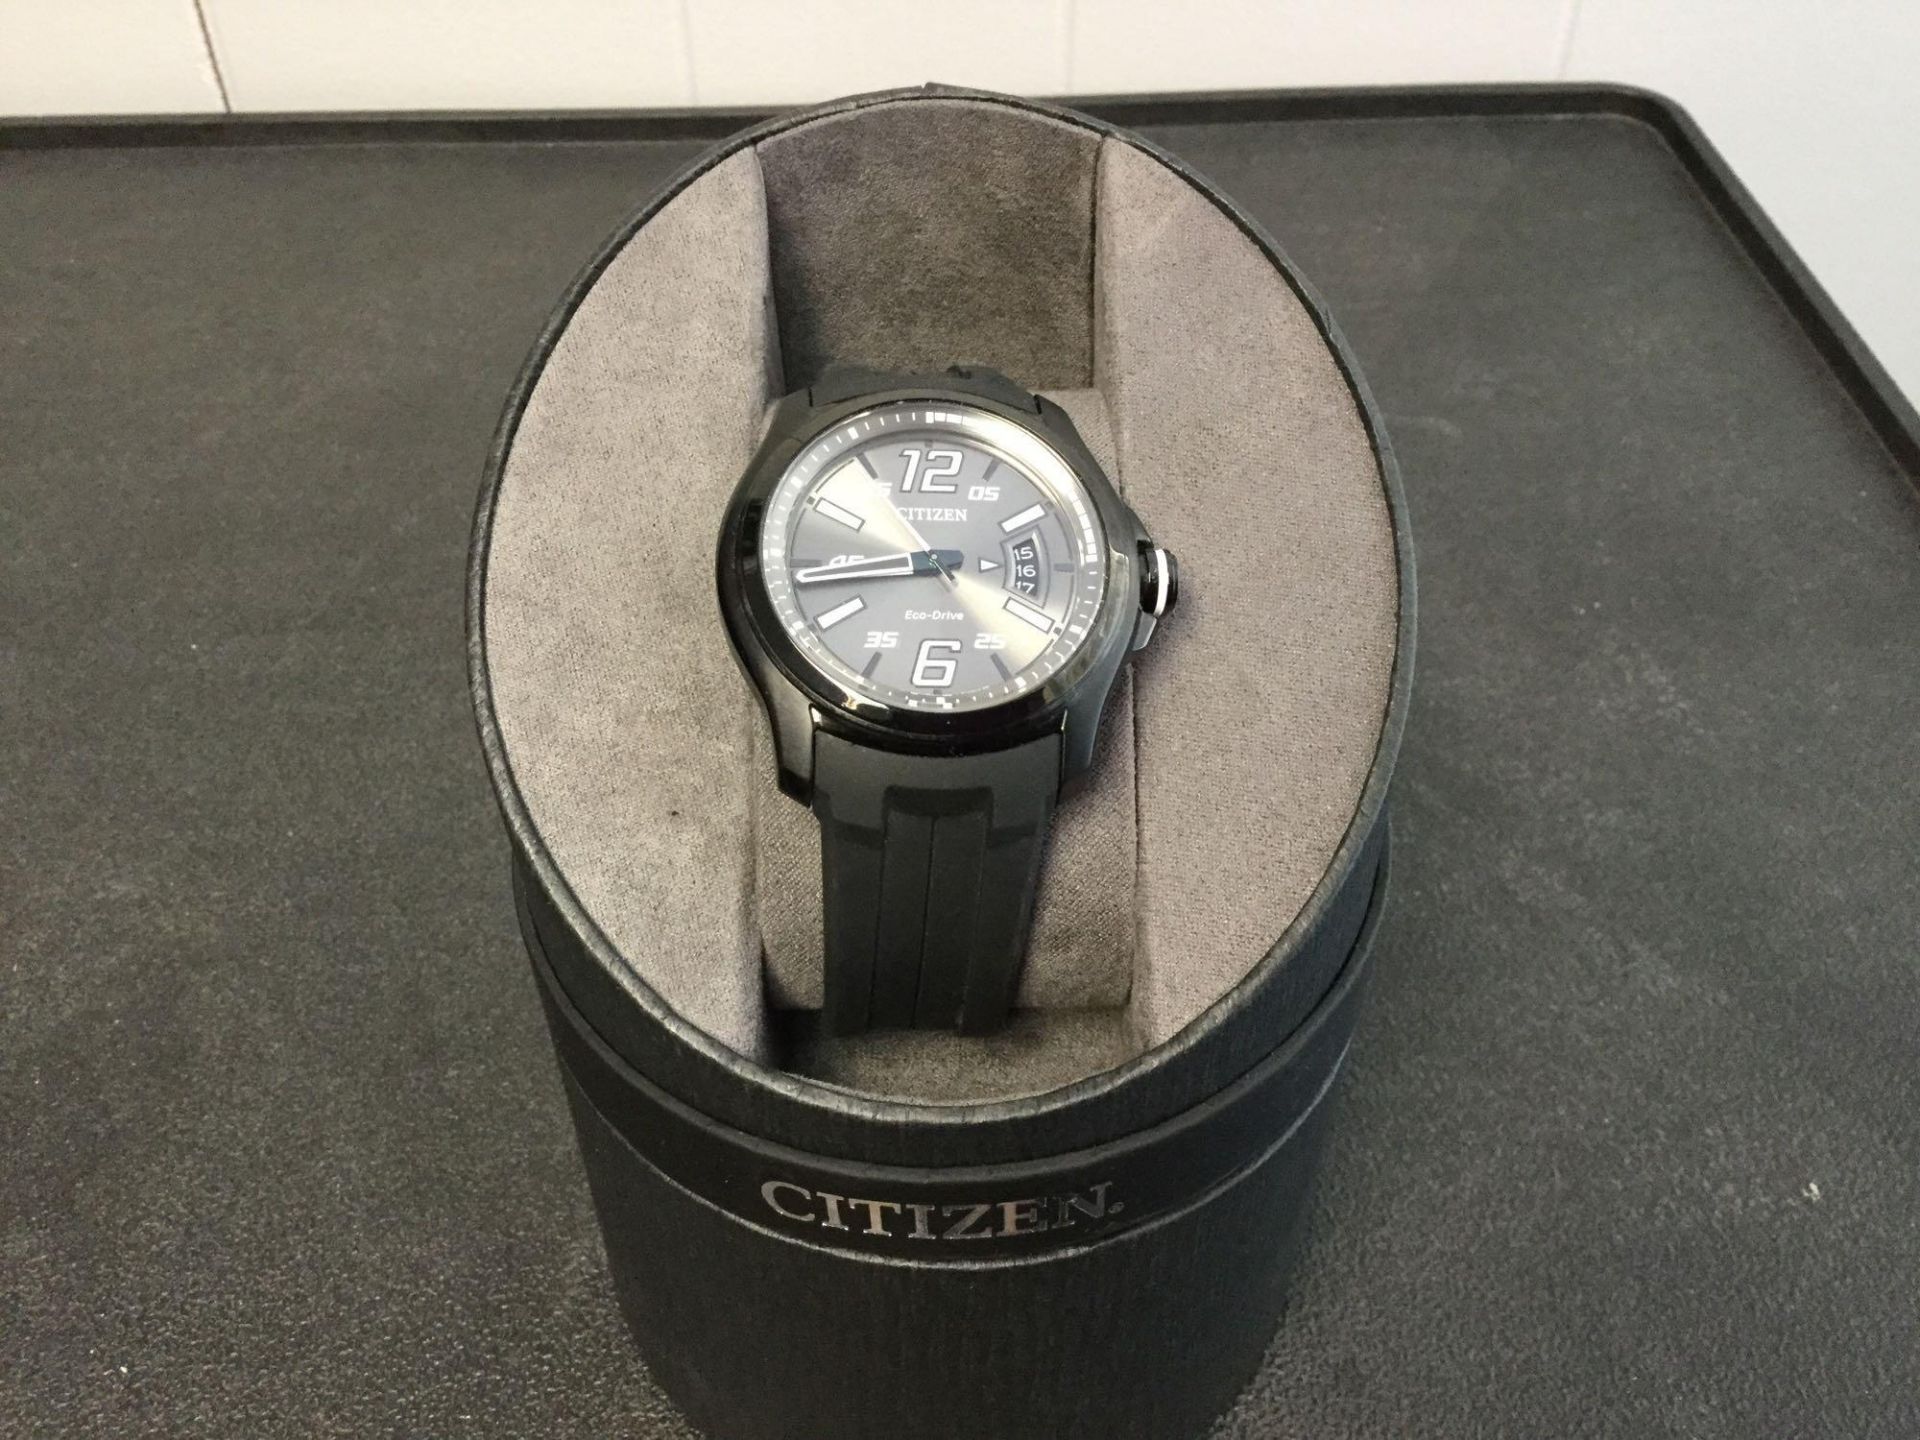 Citizen Drive Watch with Case and box - Image 4 of 4